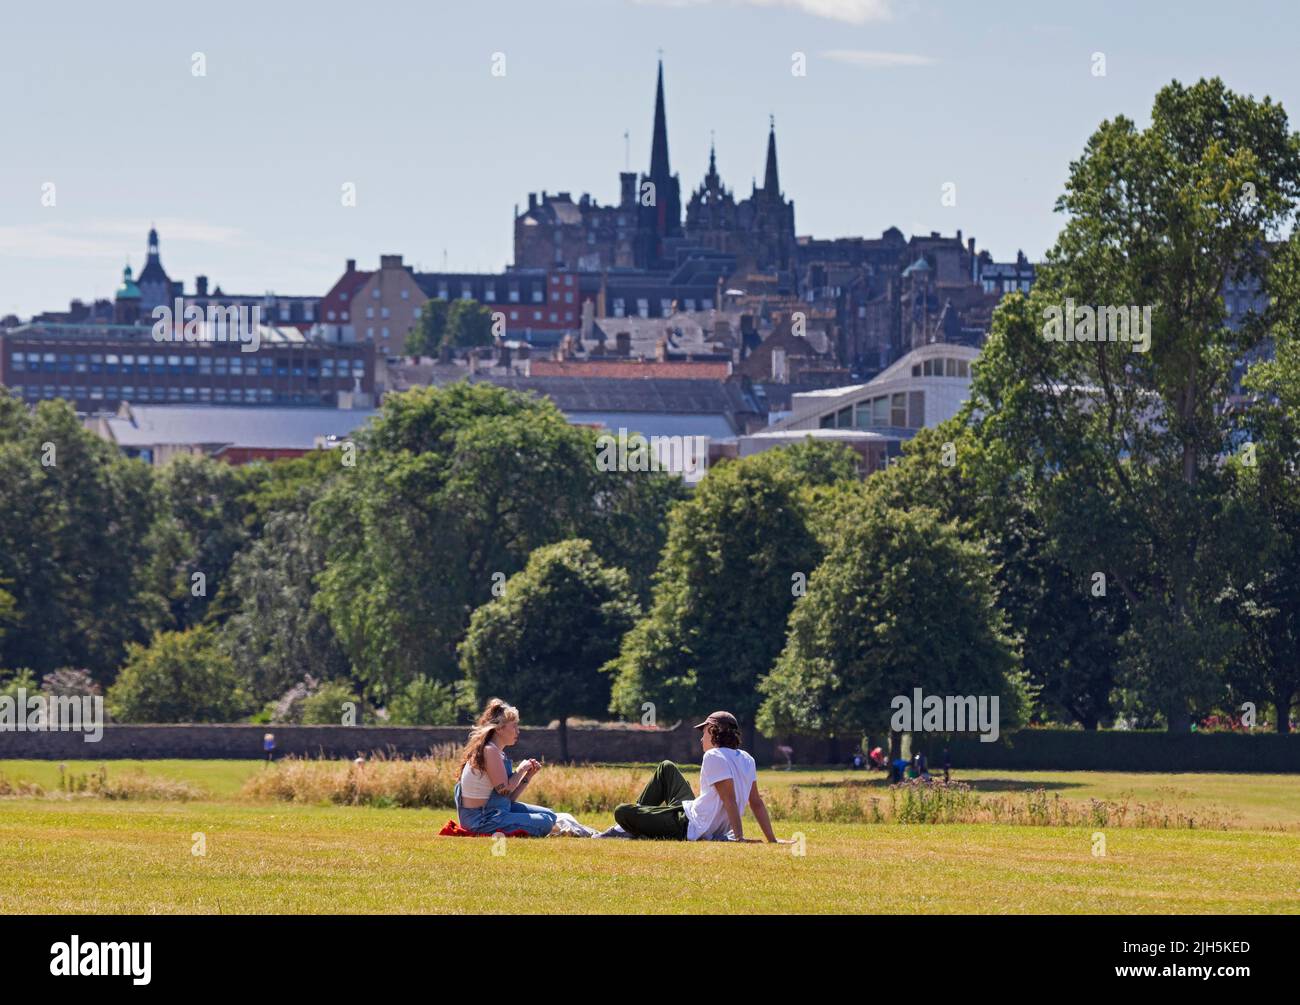 Holyrood Park, Edinburgh, Scotland, UK. 15th July 2022. People enjoy the summer in the city with temperature of 21 degrees centigrade in the scenic surroundings of historic Holyrood Park in the city centre below Arthur's Seat. Pictured: A young couple relax by sitting on the grass chatting with the architecture of the city centre in the background. Credit: Scottishcreative/alamy live news. Stock Photo